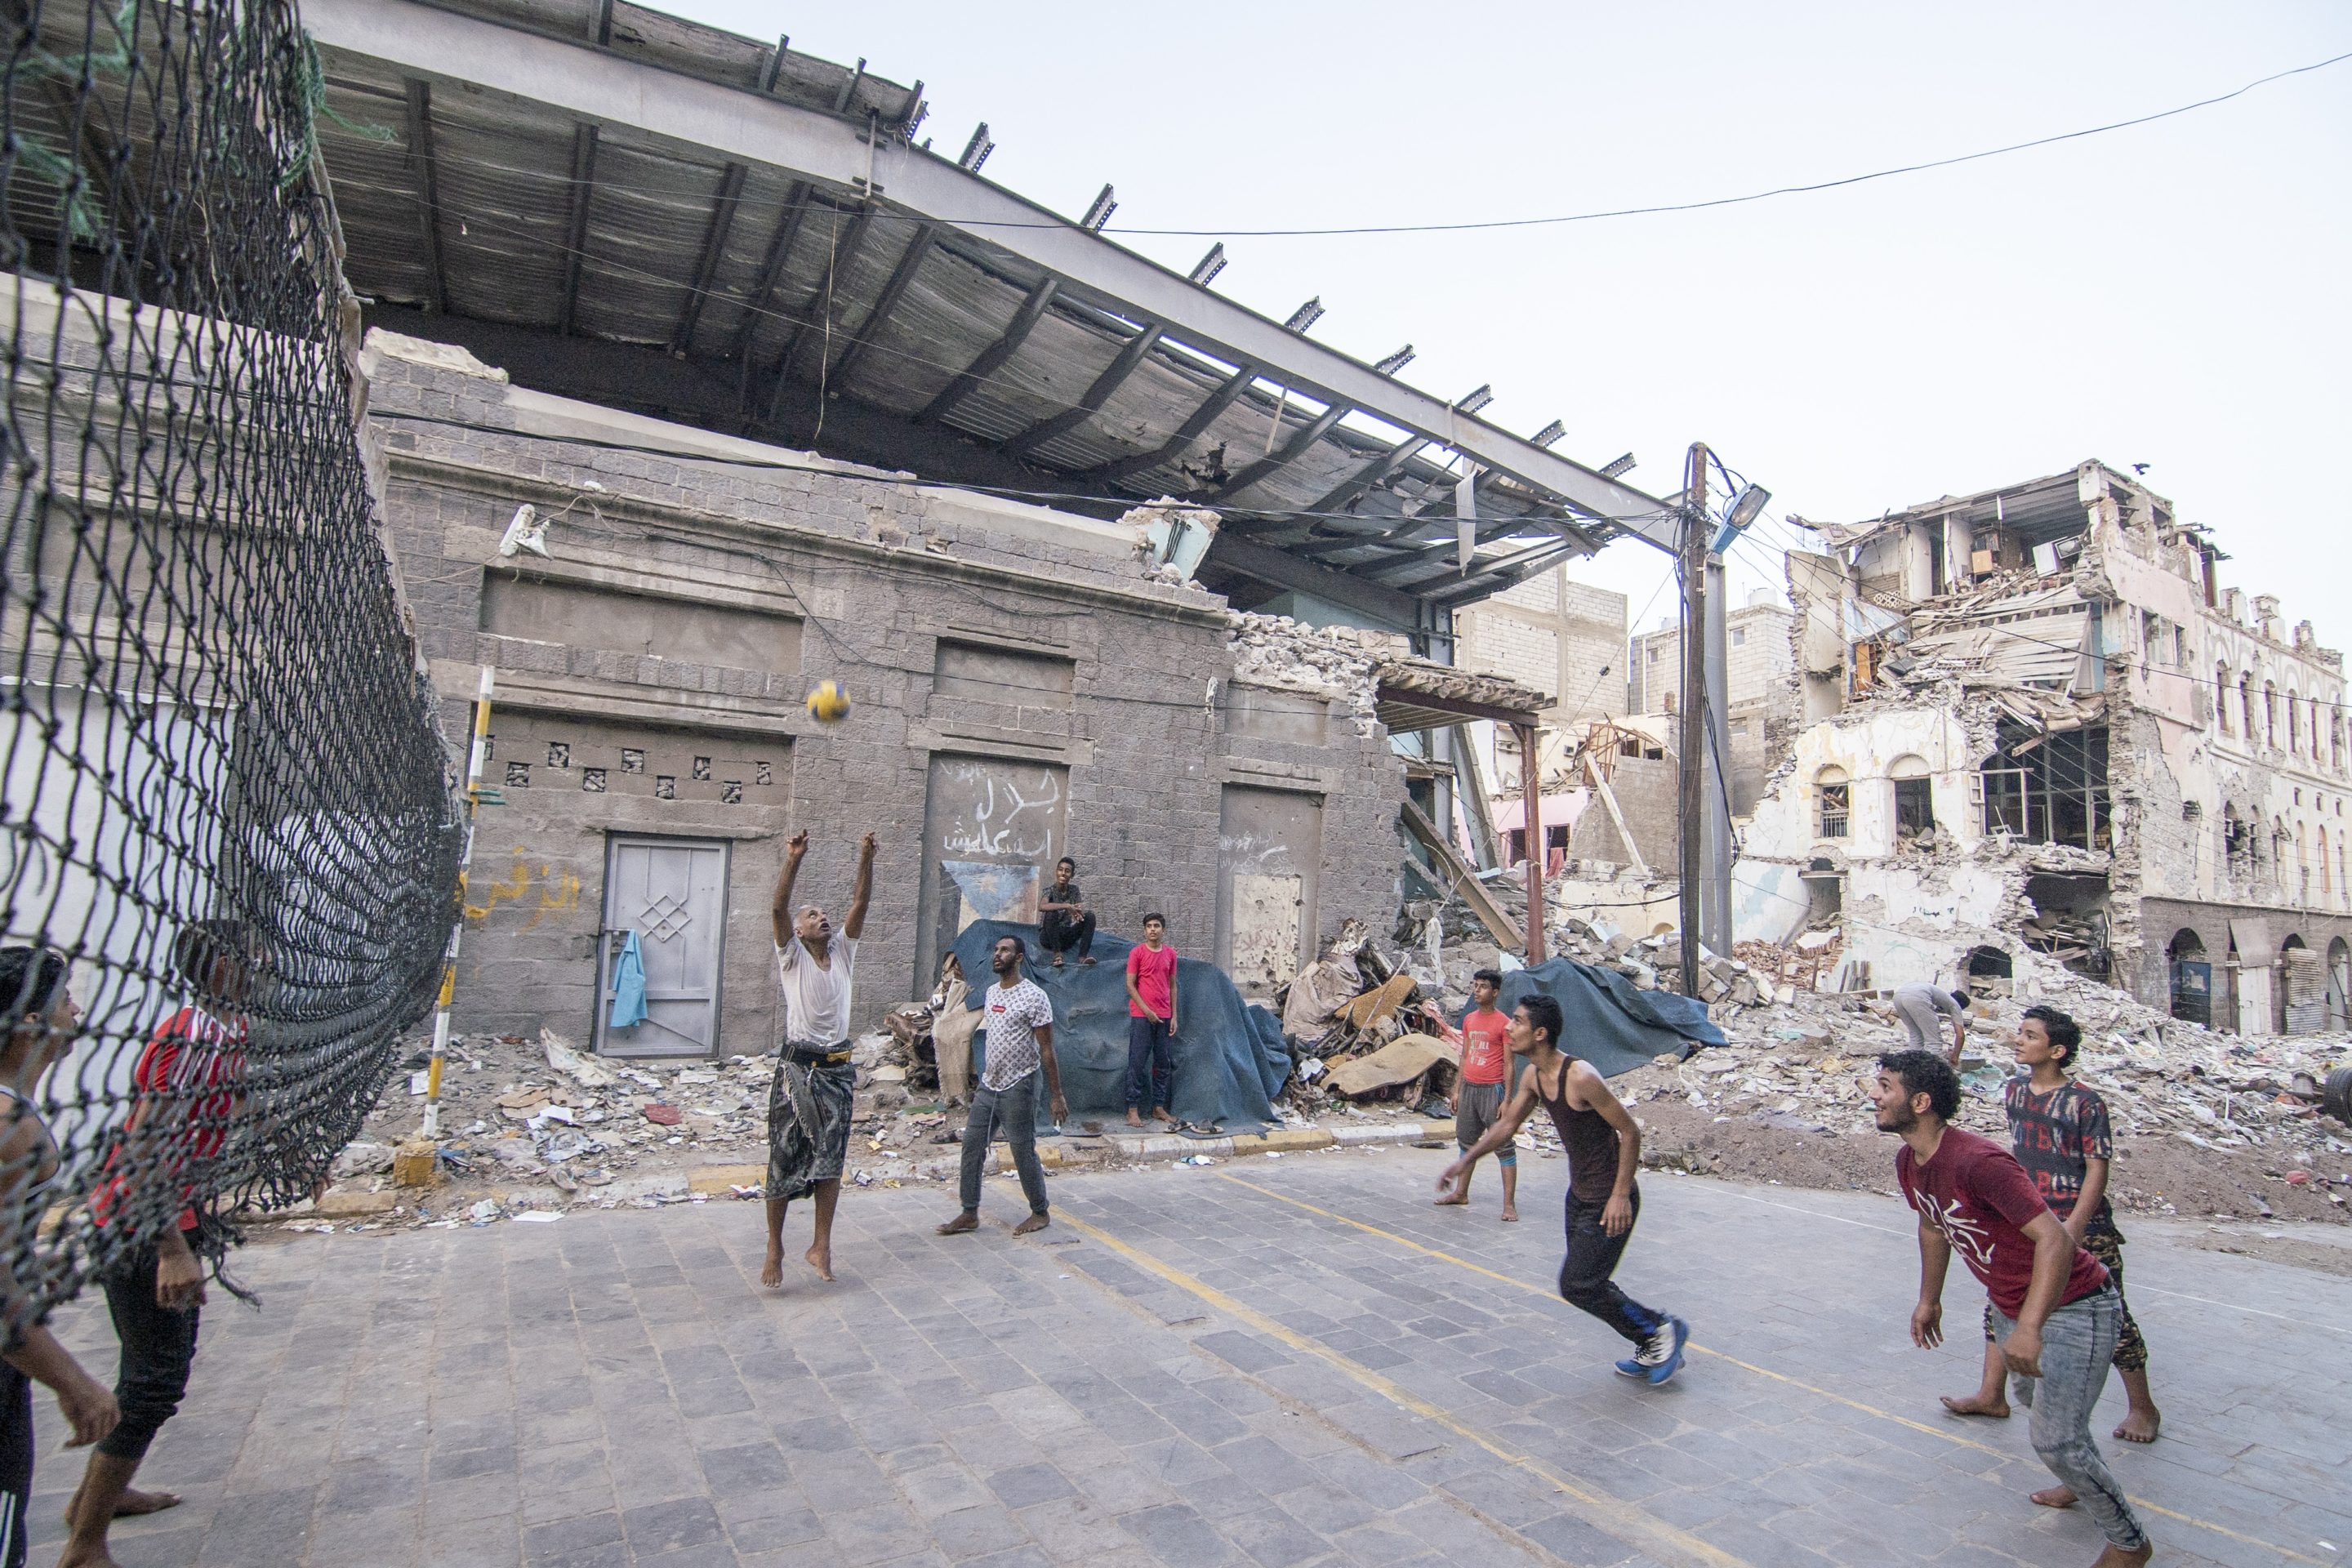 A group of people play volleyball among war ruins